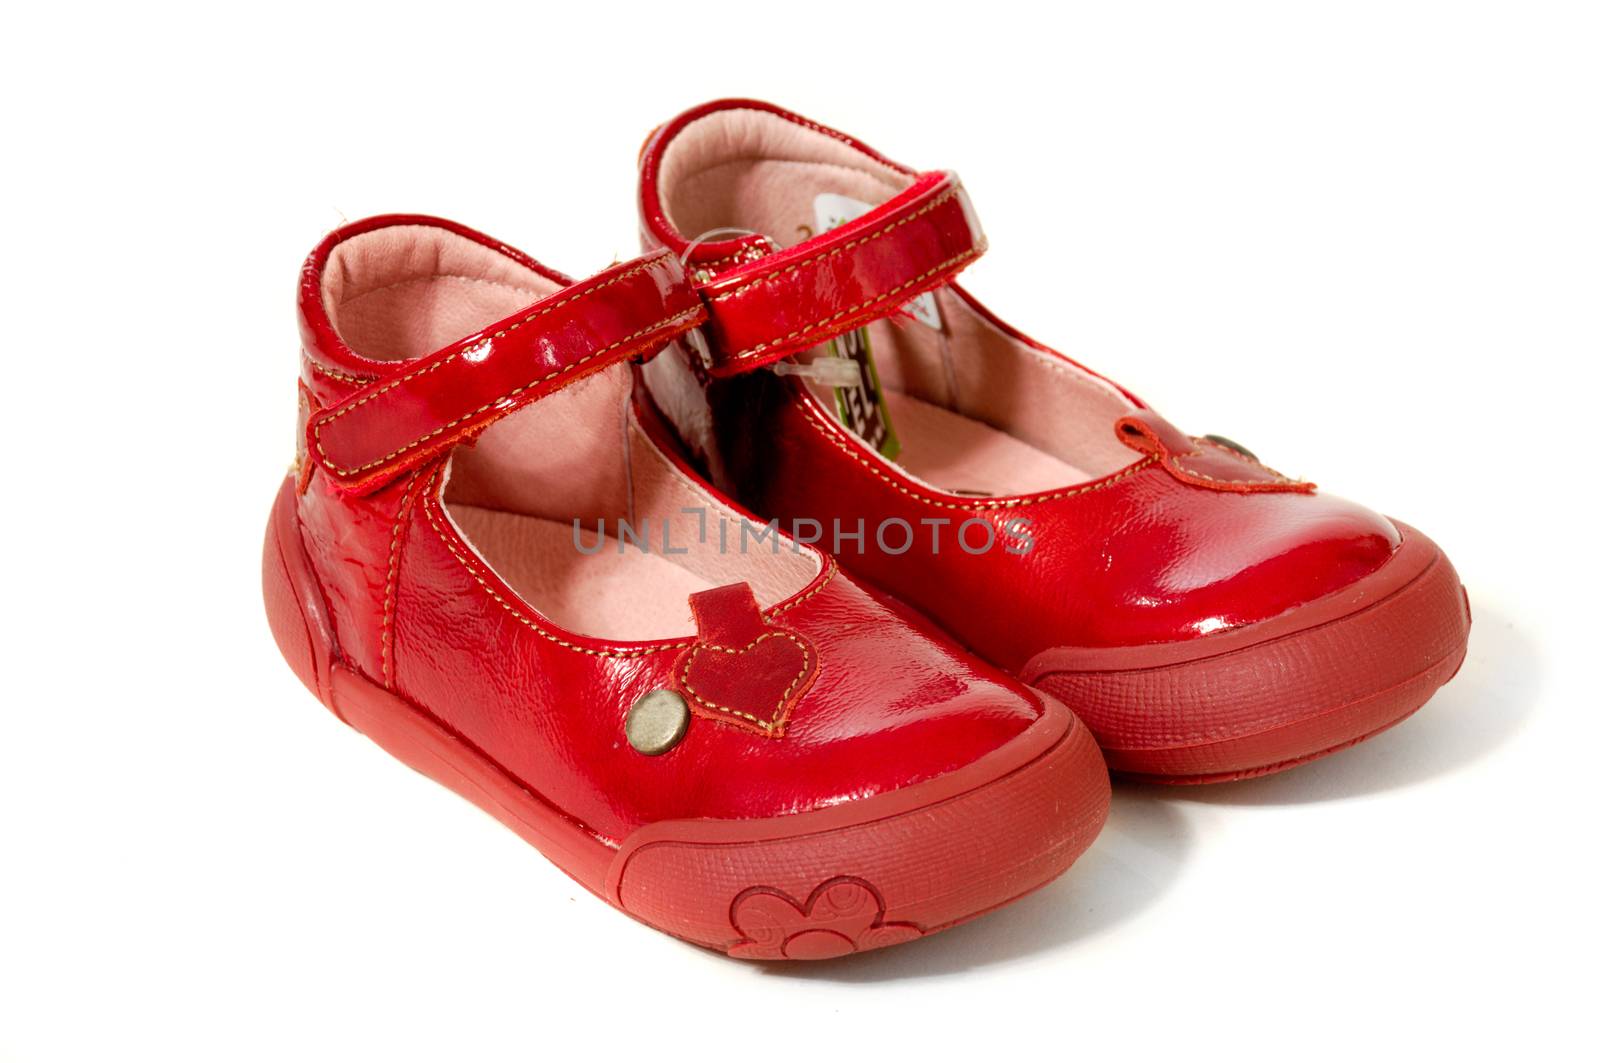 A pair of red shoes isolated on a clean white background.